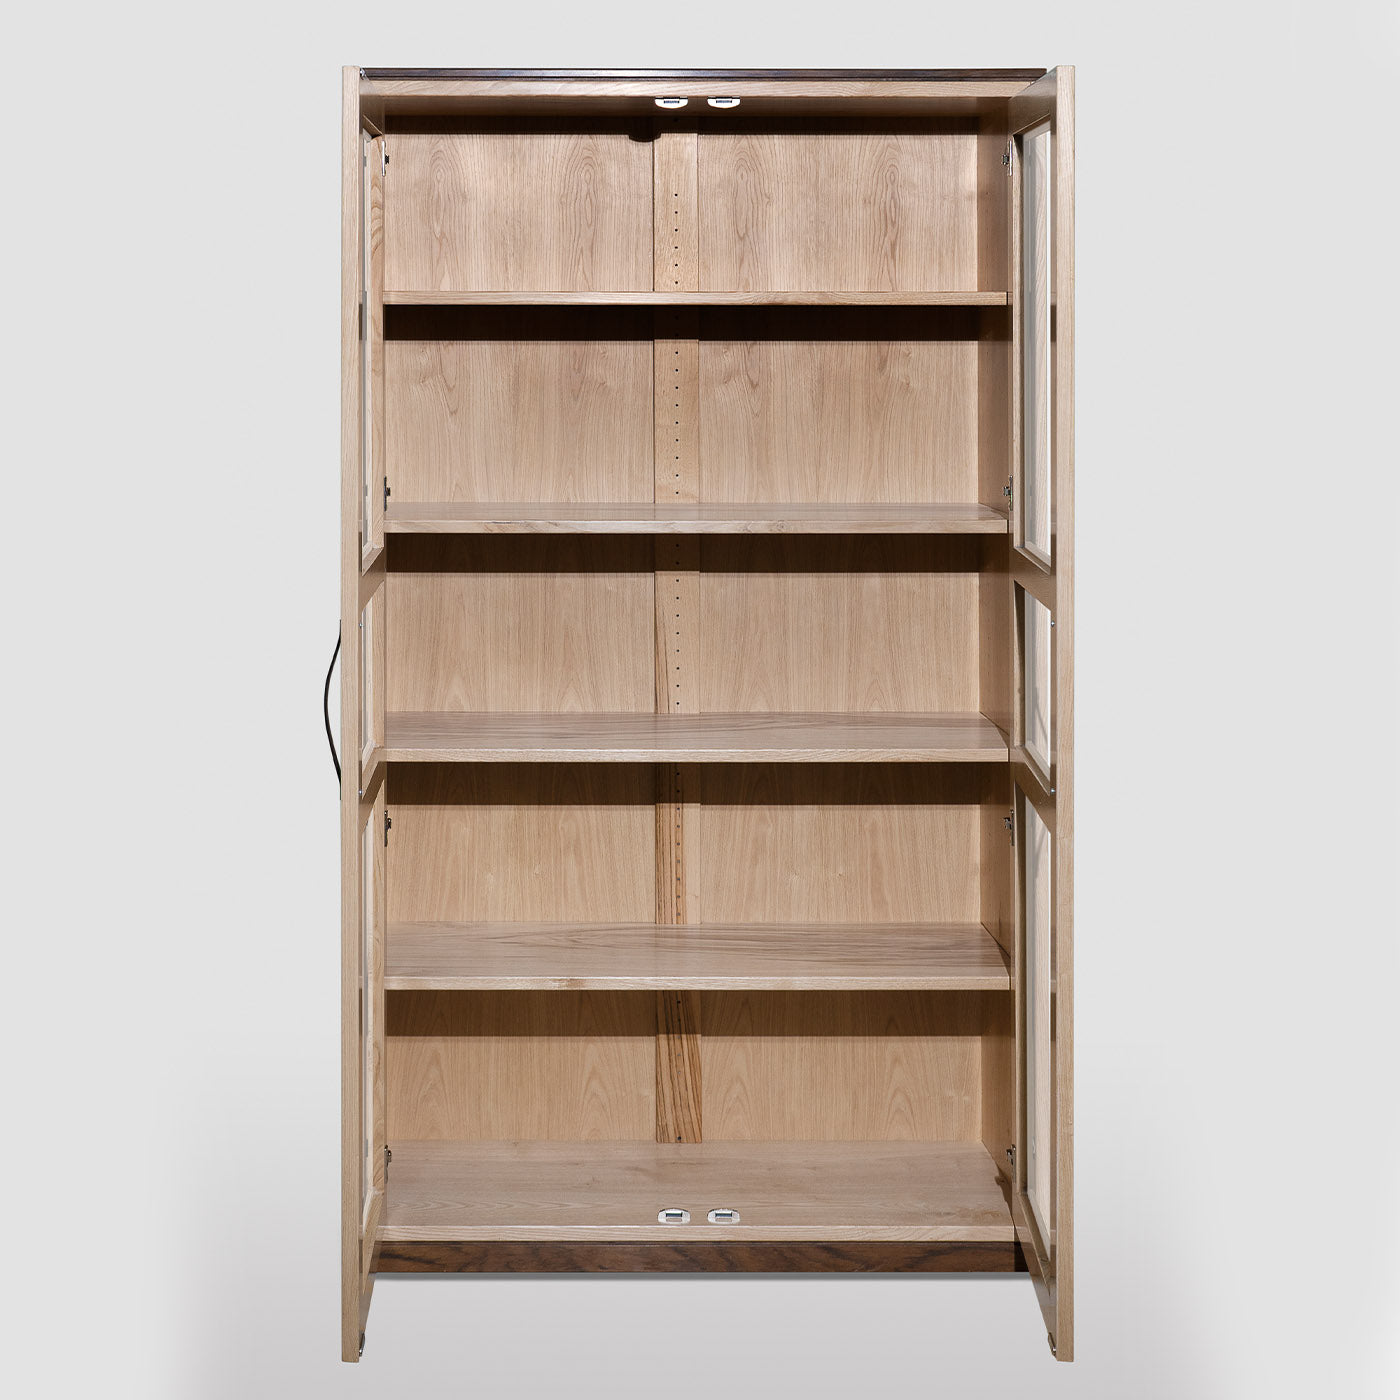 Siv Two-Door Bookcase by Erika Gambella - Alternative view 2